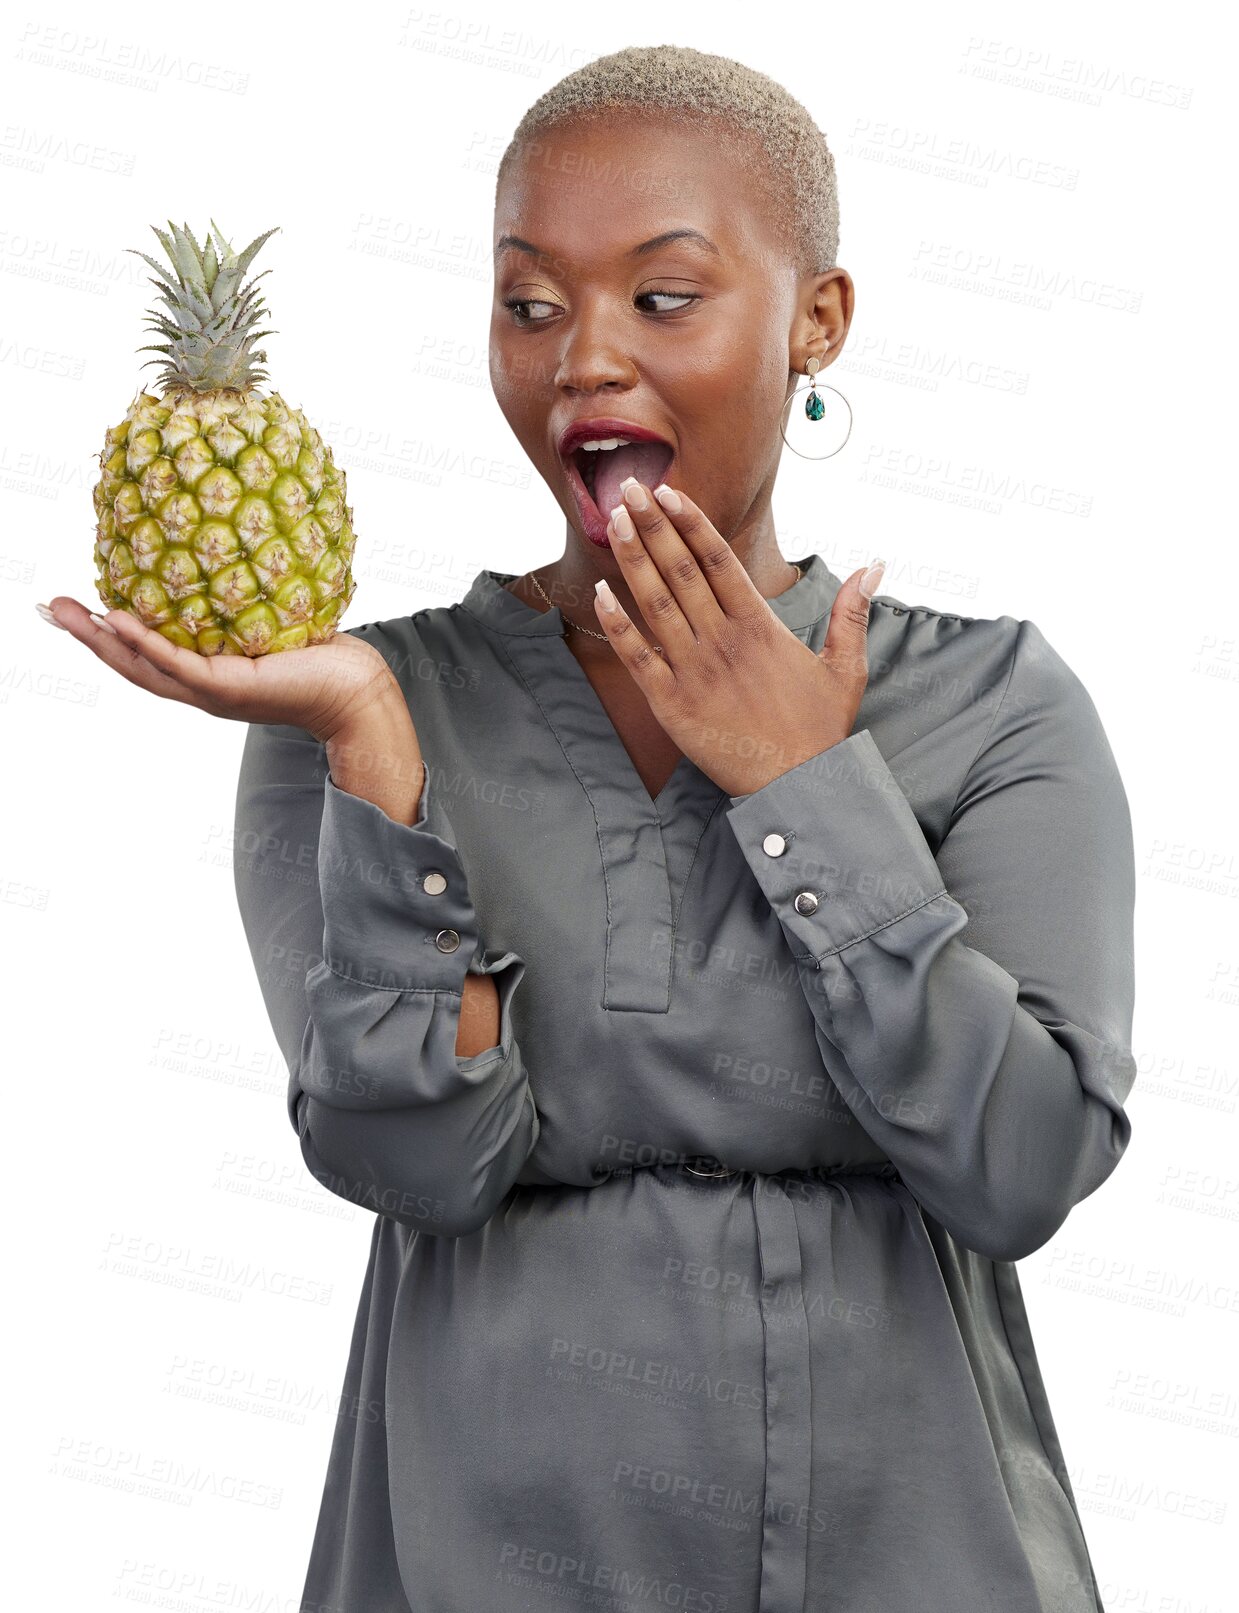 Buy stock photo Black woman, pineapple and wow with detox, weight loss and health food for vitamin c. African female person, fruits and tropical diet secret of a model isolated on a transparent, png background